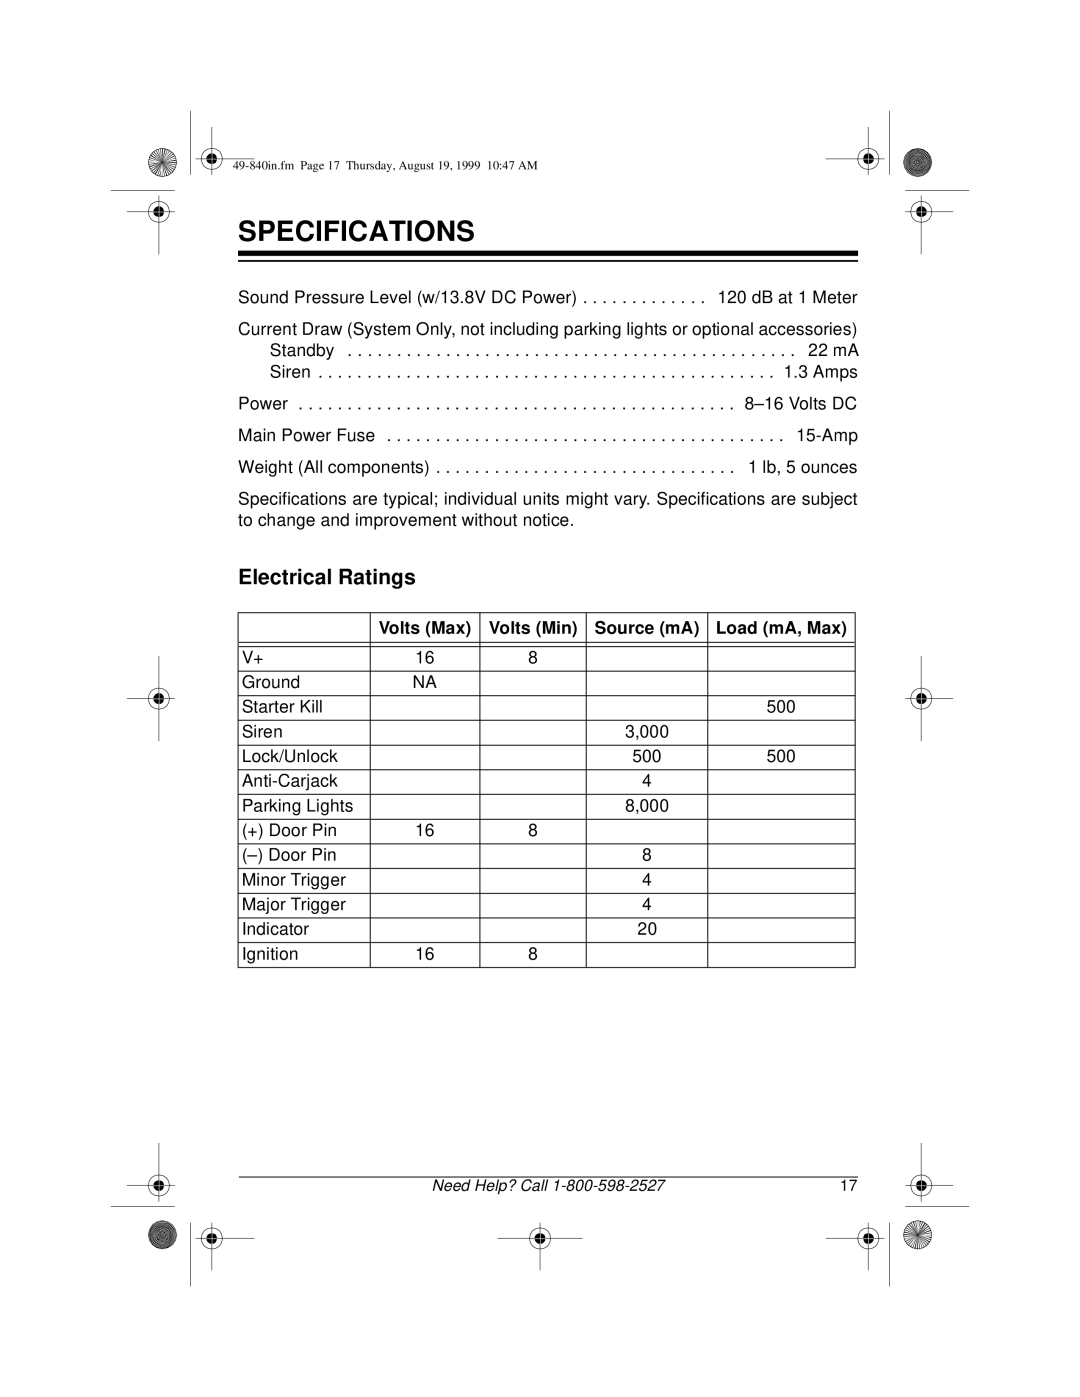 Radio Shack RS-4000 installation manual Specifications, Electrical Ratings 